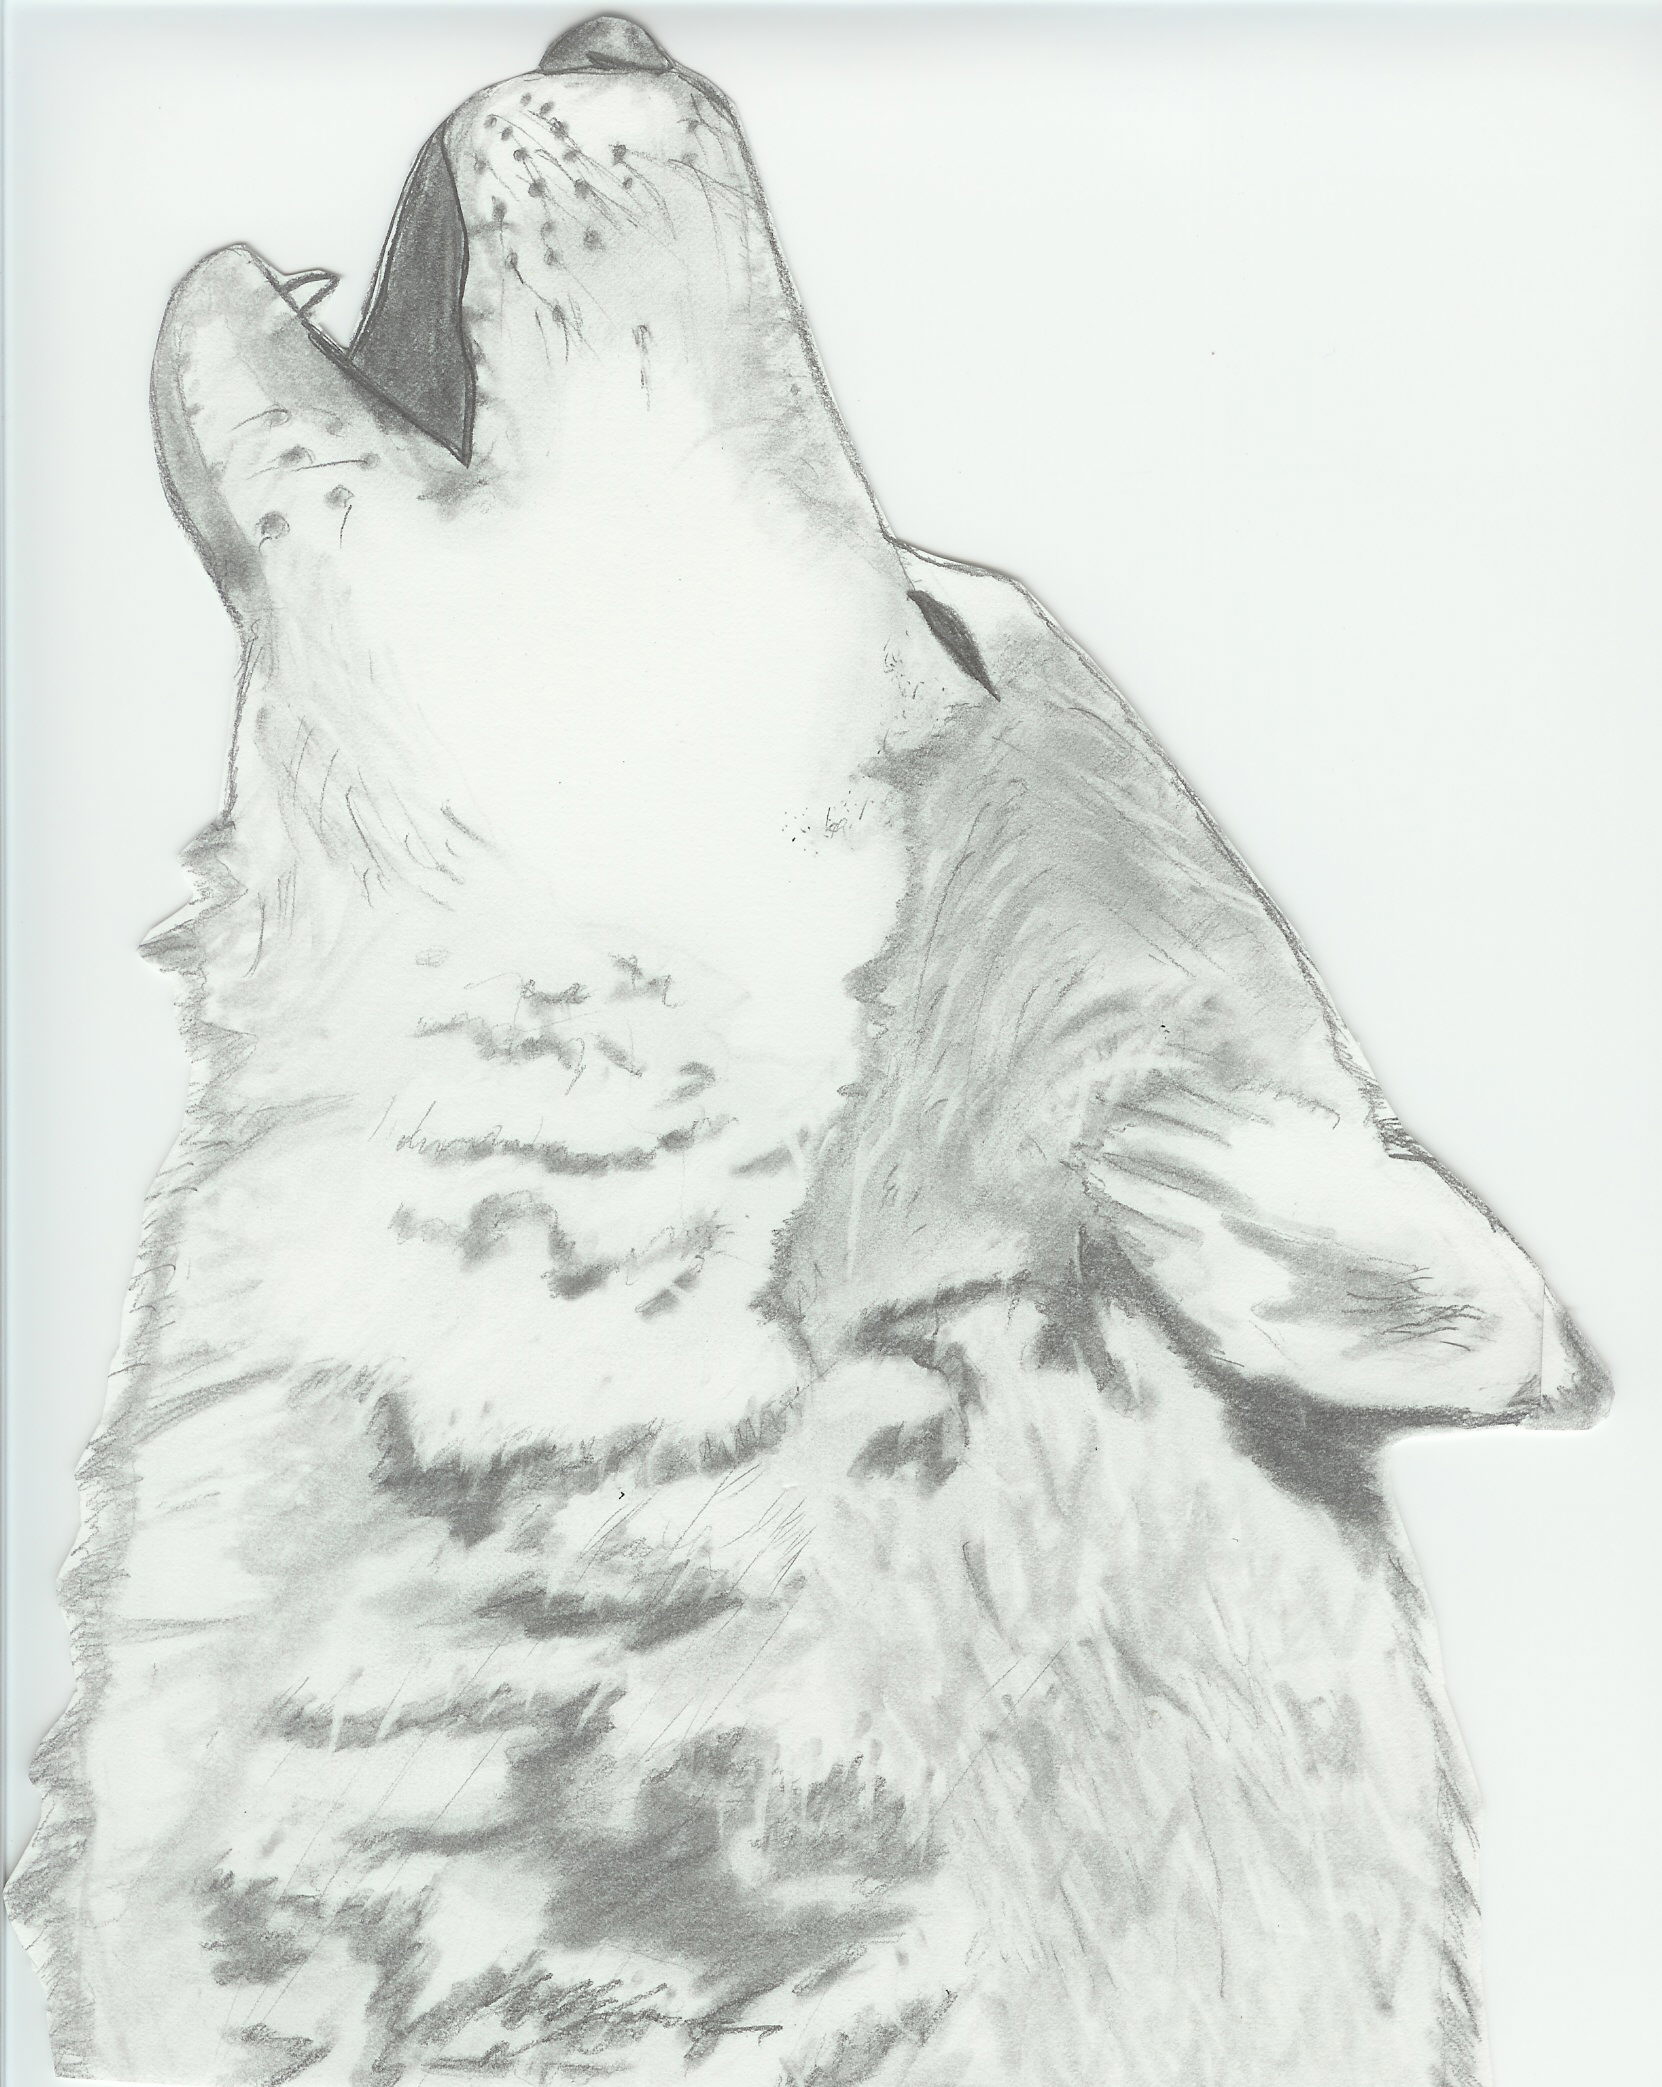 simple howling wolf drawing